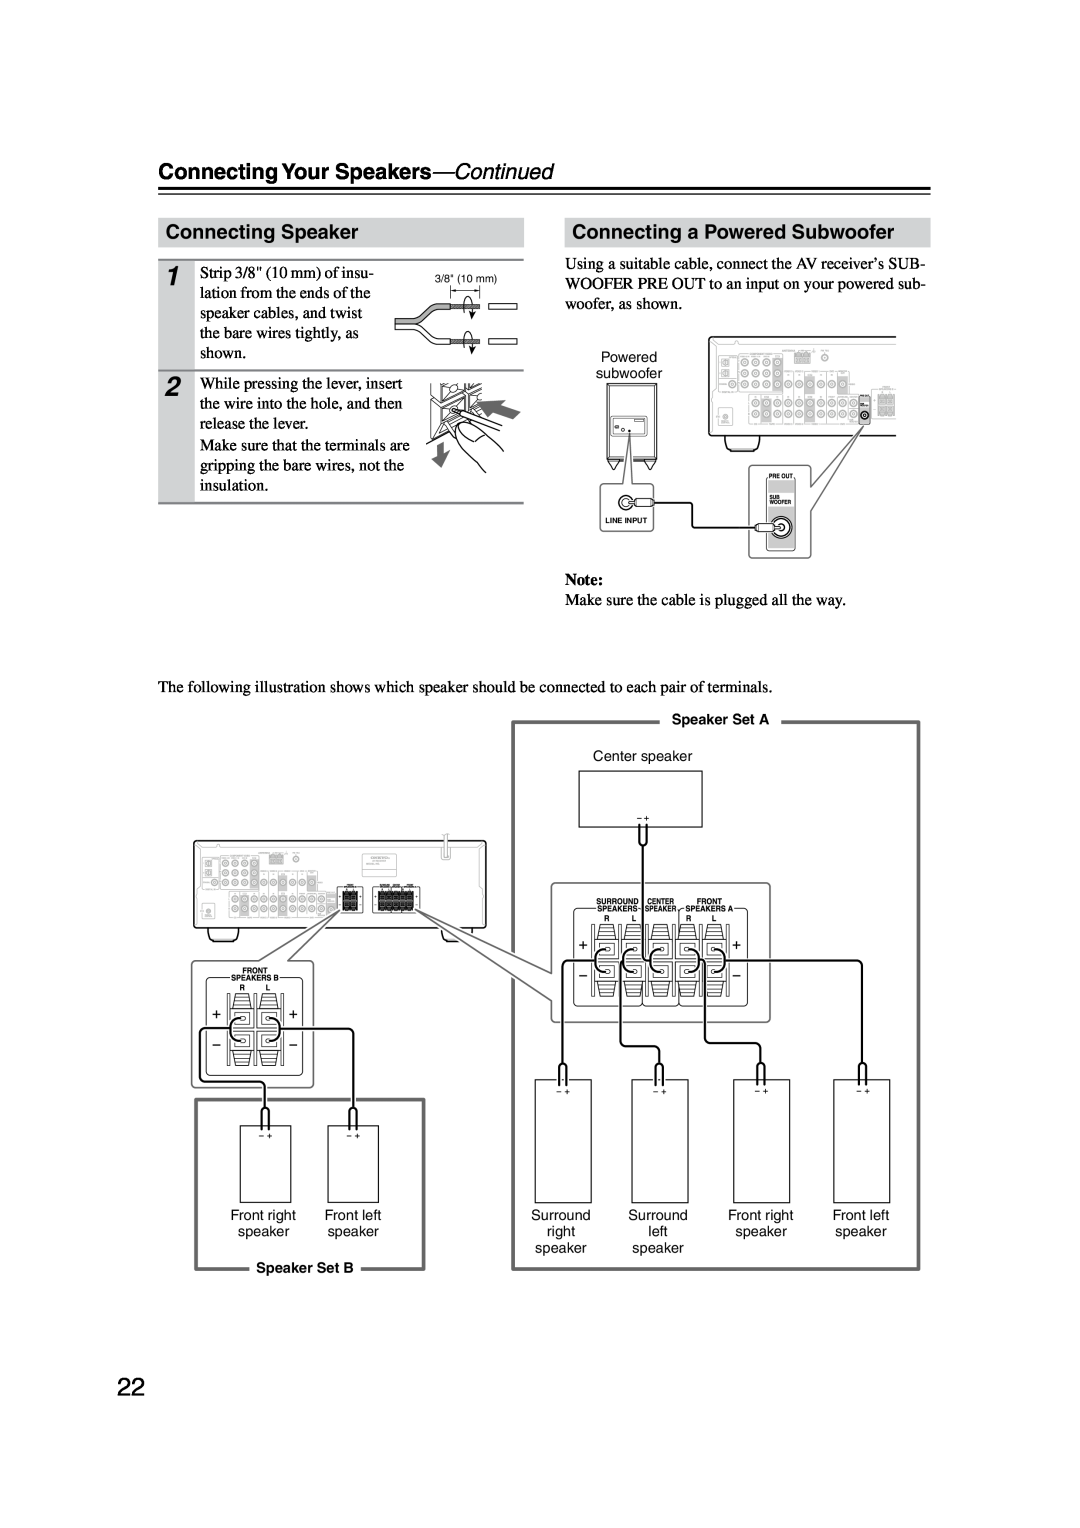 Onkyo HT-S4100 instruction manual Connecting Your Speakers-Continued, Connecting Speaker, Connecting a Powered Subwoofer 